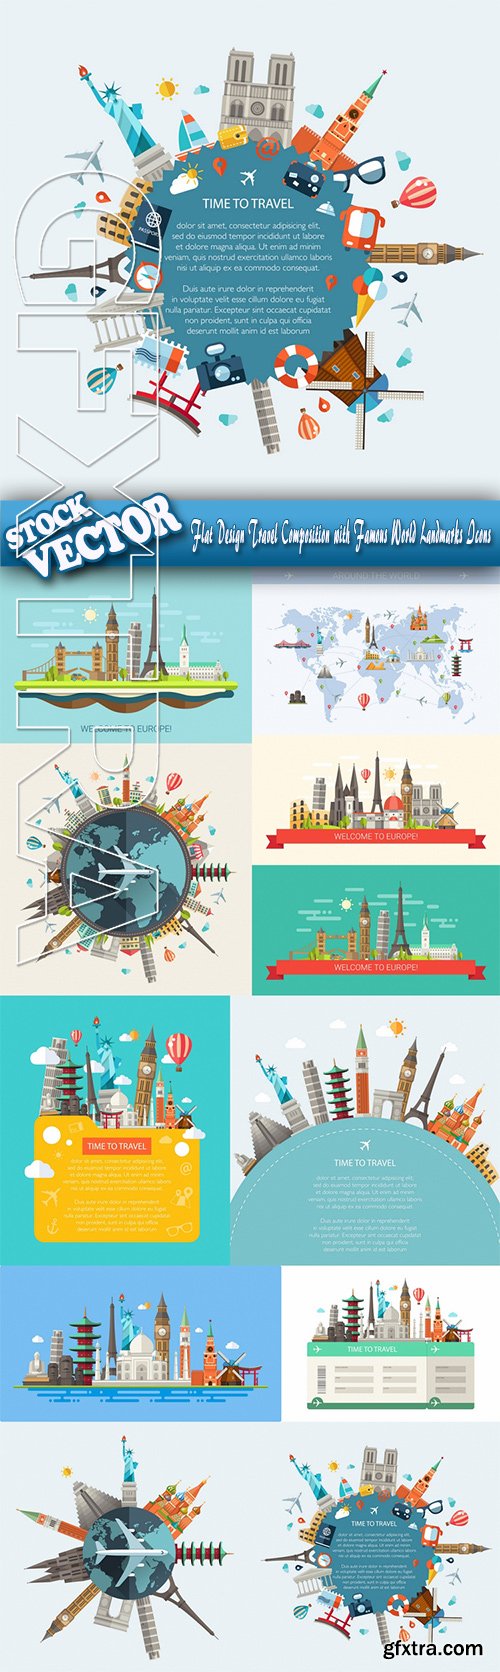 Stock Vector - Flat Design Travel Composition with Famous World Landmarks Icons